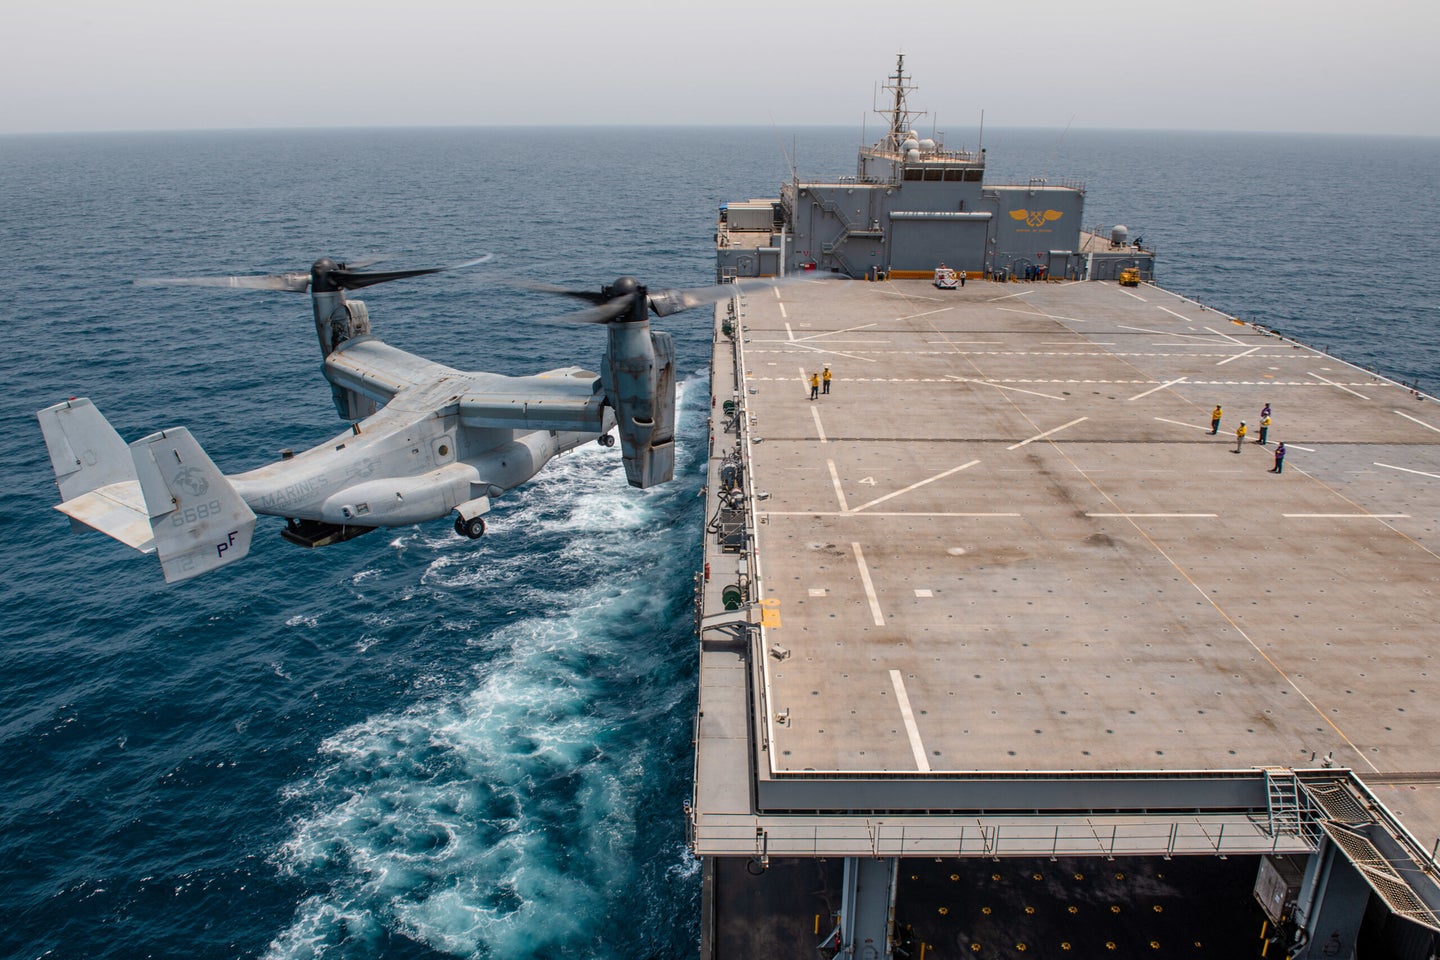 210716-N-KZ419-1575 ARABIAN GULF (July 16, 2021) – An MV22 Osprey helicopter attached to Task Force 51/5 prepares to land aboard expeditionary sea base USS Lewis B. Puller (ESB 3), during flight operations in the Arabian Gulf, July 16. Lewis B. Puller is deployed to the U.S. 5th Fleet area of operations in support of naval operations to ensure maritime stability and security in the Central Region, connecting the Mediterranean and Pacific through the Western Indian Ocean and three strategic choke points. (U.S. Navy photo by Mass Communication Specialist 2nd Class Dawson Roth)